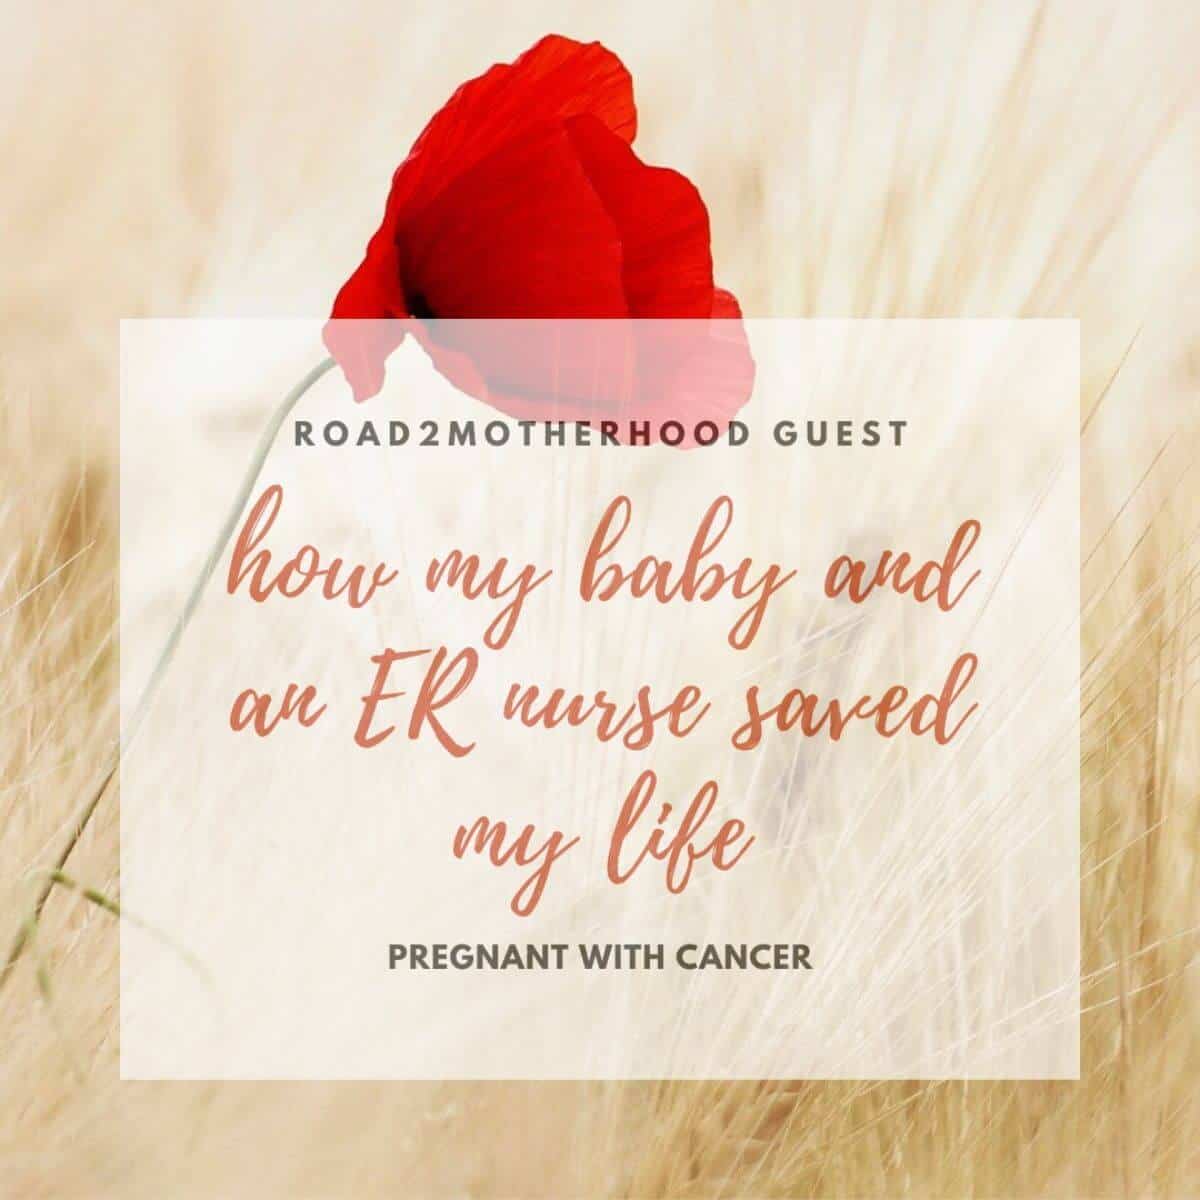 image that says how my baby and an er nurse saved my life with a logo for road2motherhood